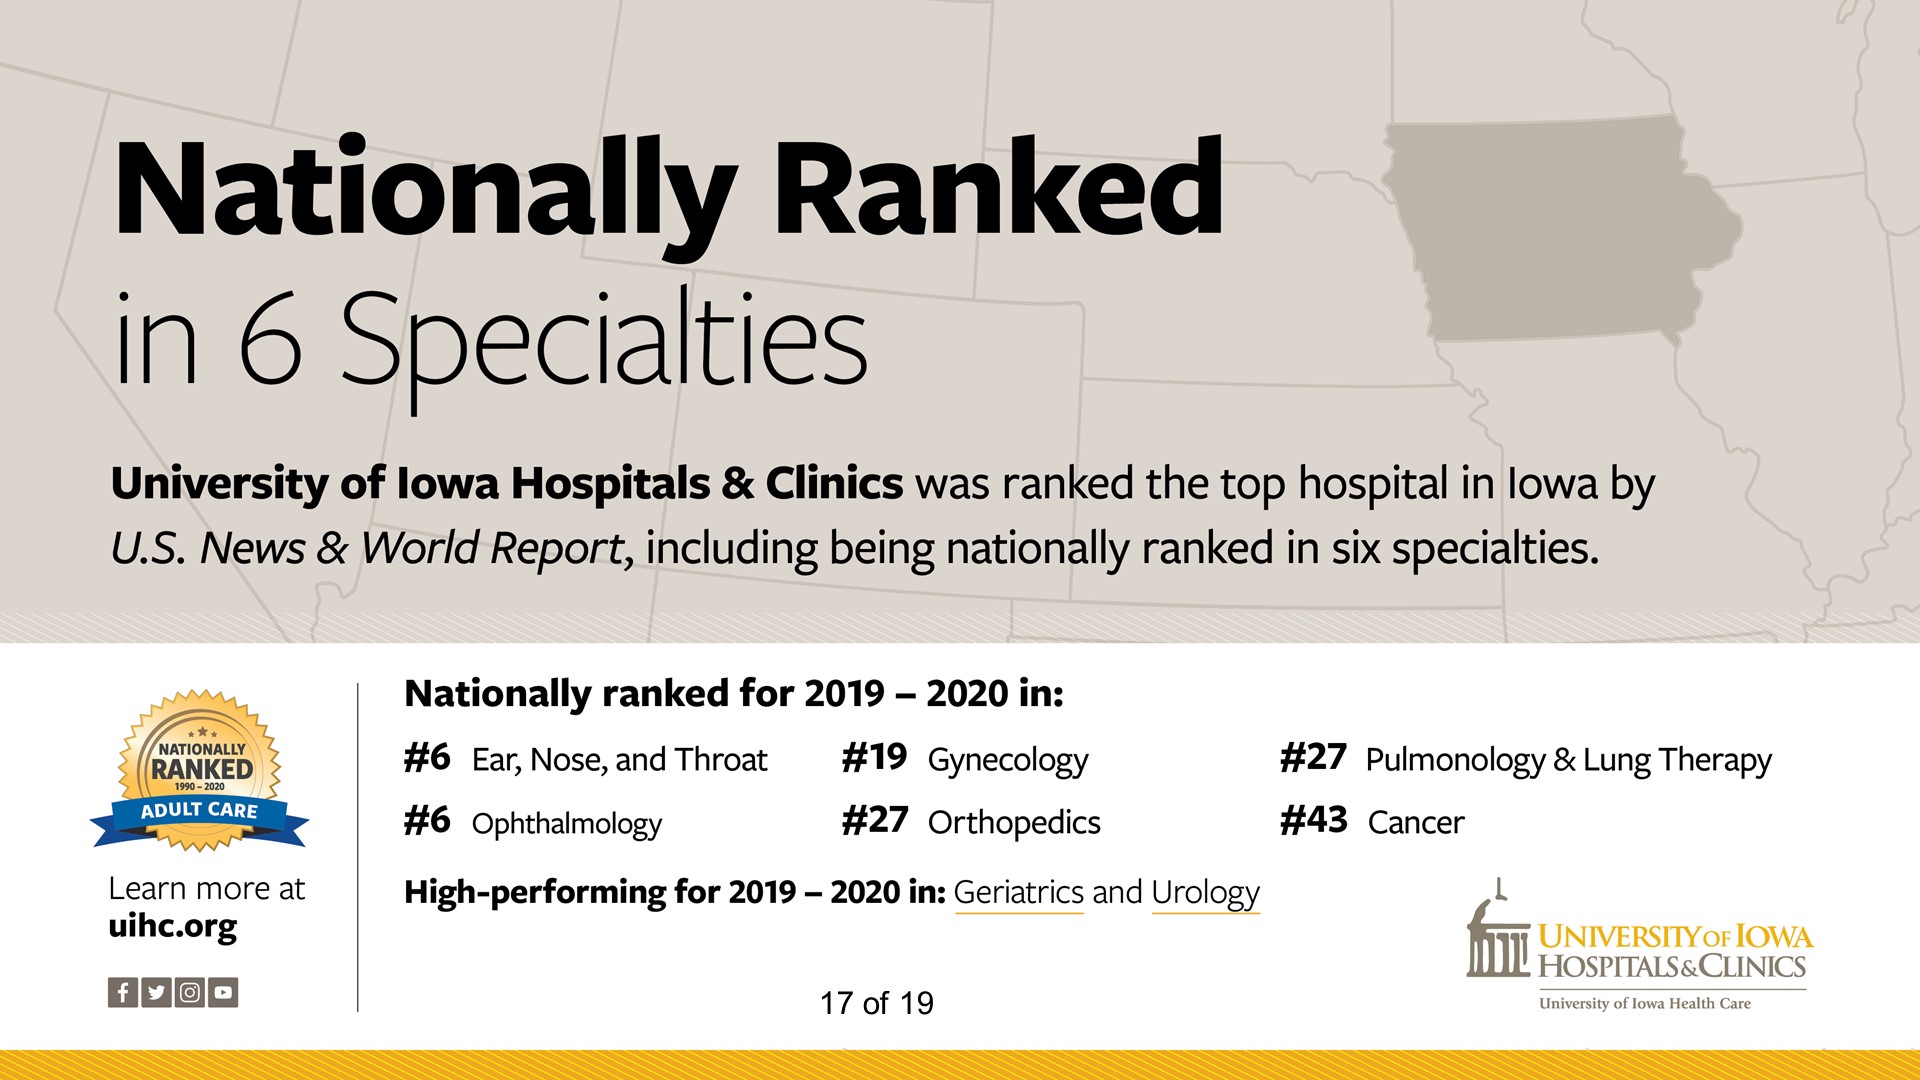 Nationally ranked in 6 specialties